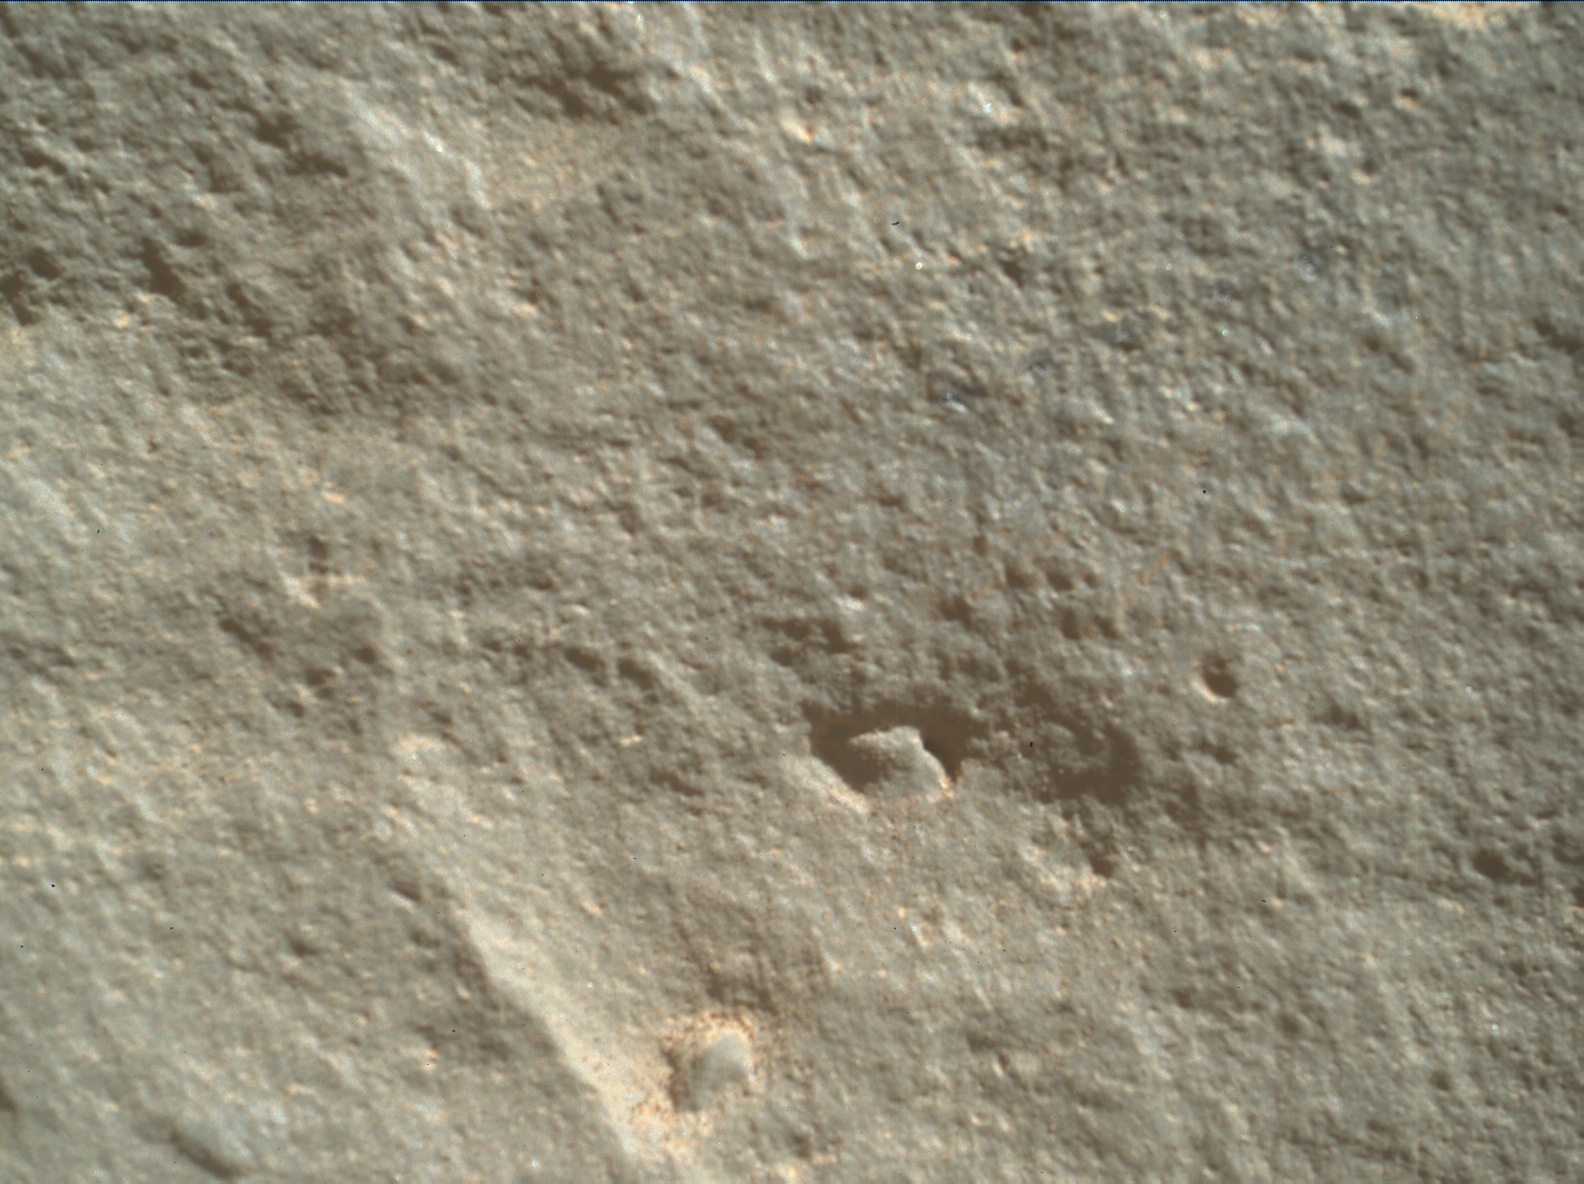 Nasa's Mars rover Curiosity acquired this image using its Mars Hand Lens Imager (MAHLI) on Sol 3928